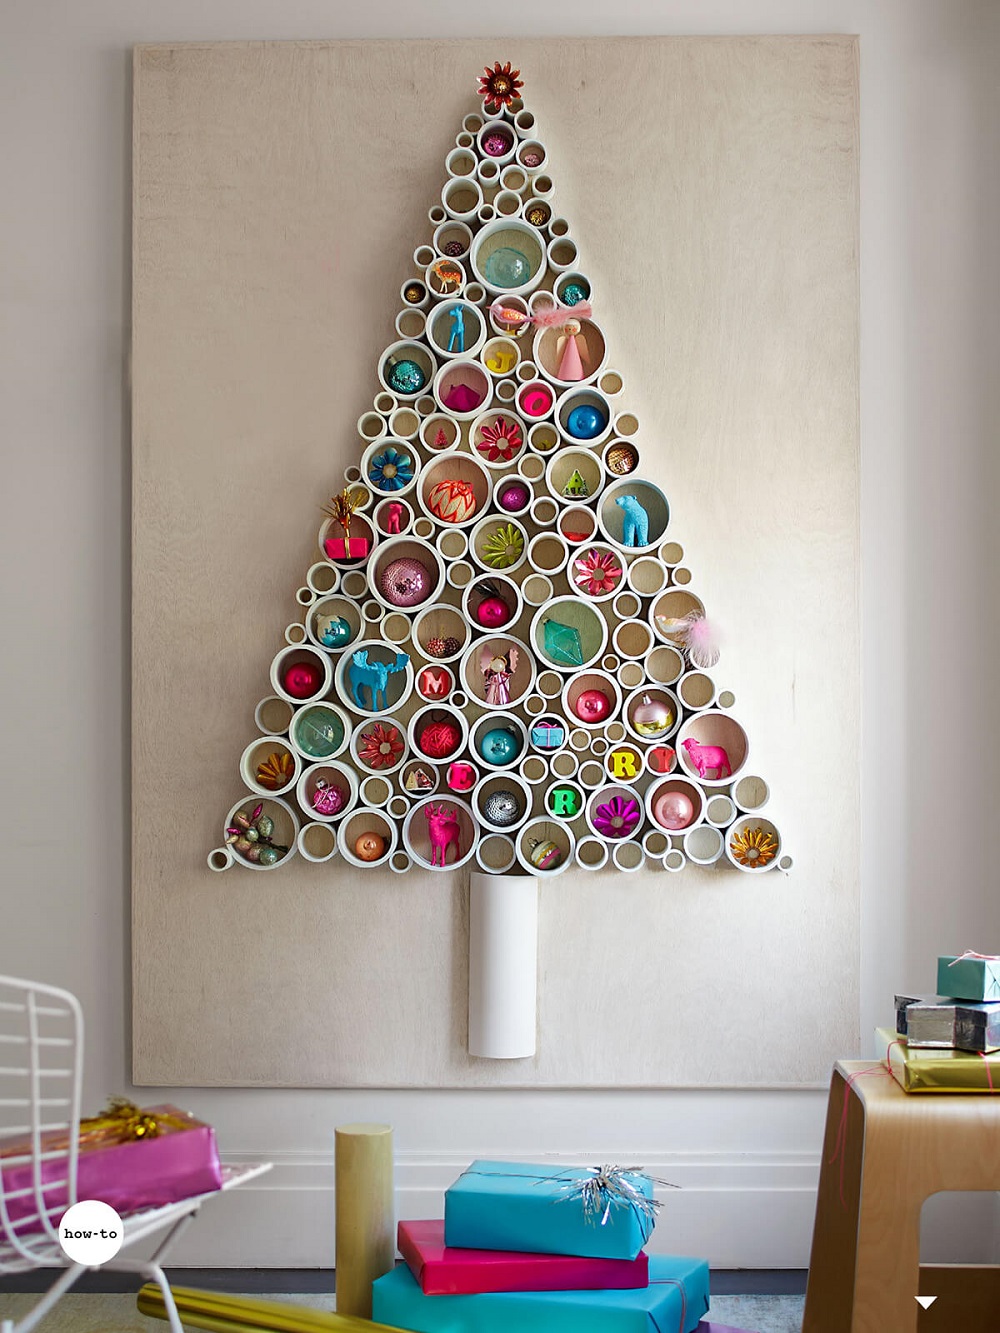 t3-39 Unconventional Christmas tree ideas you can use in your living room